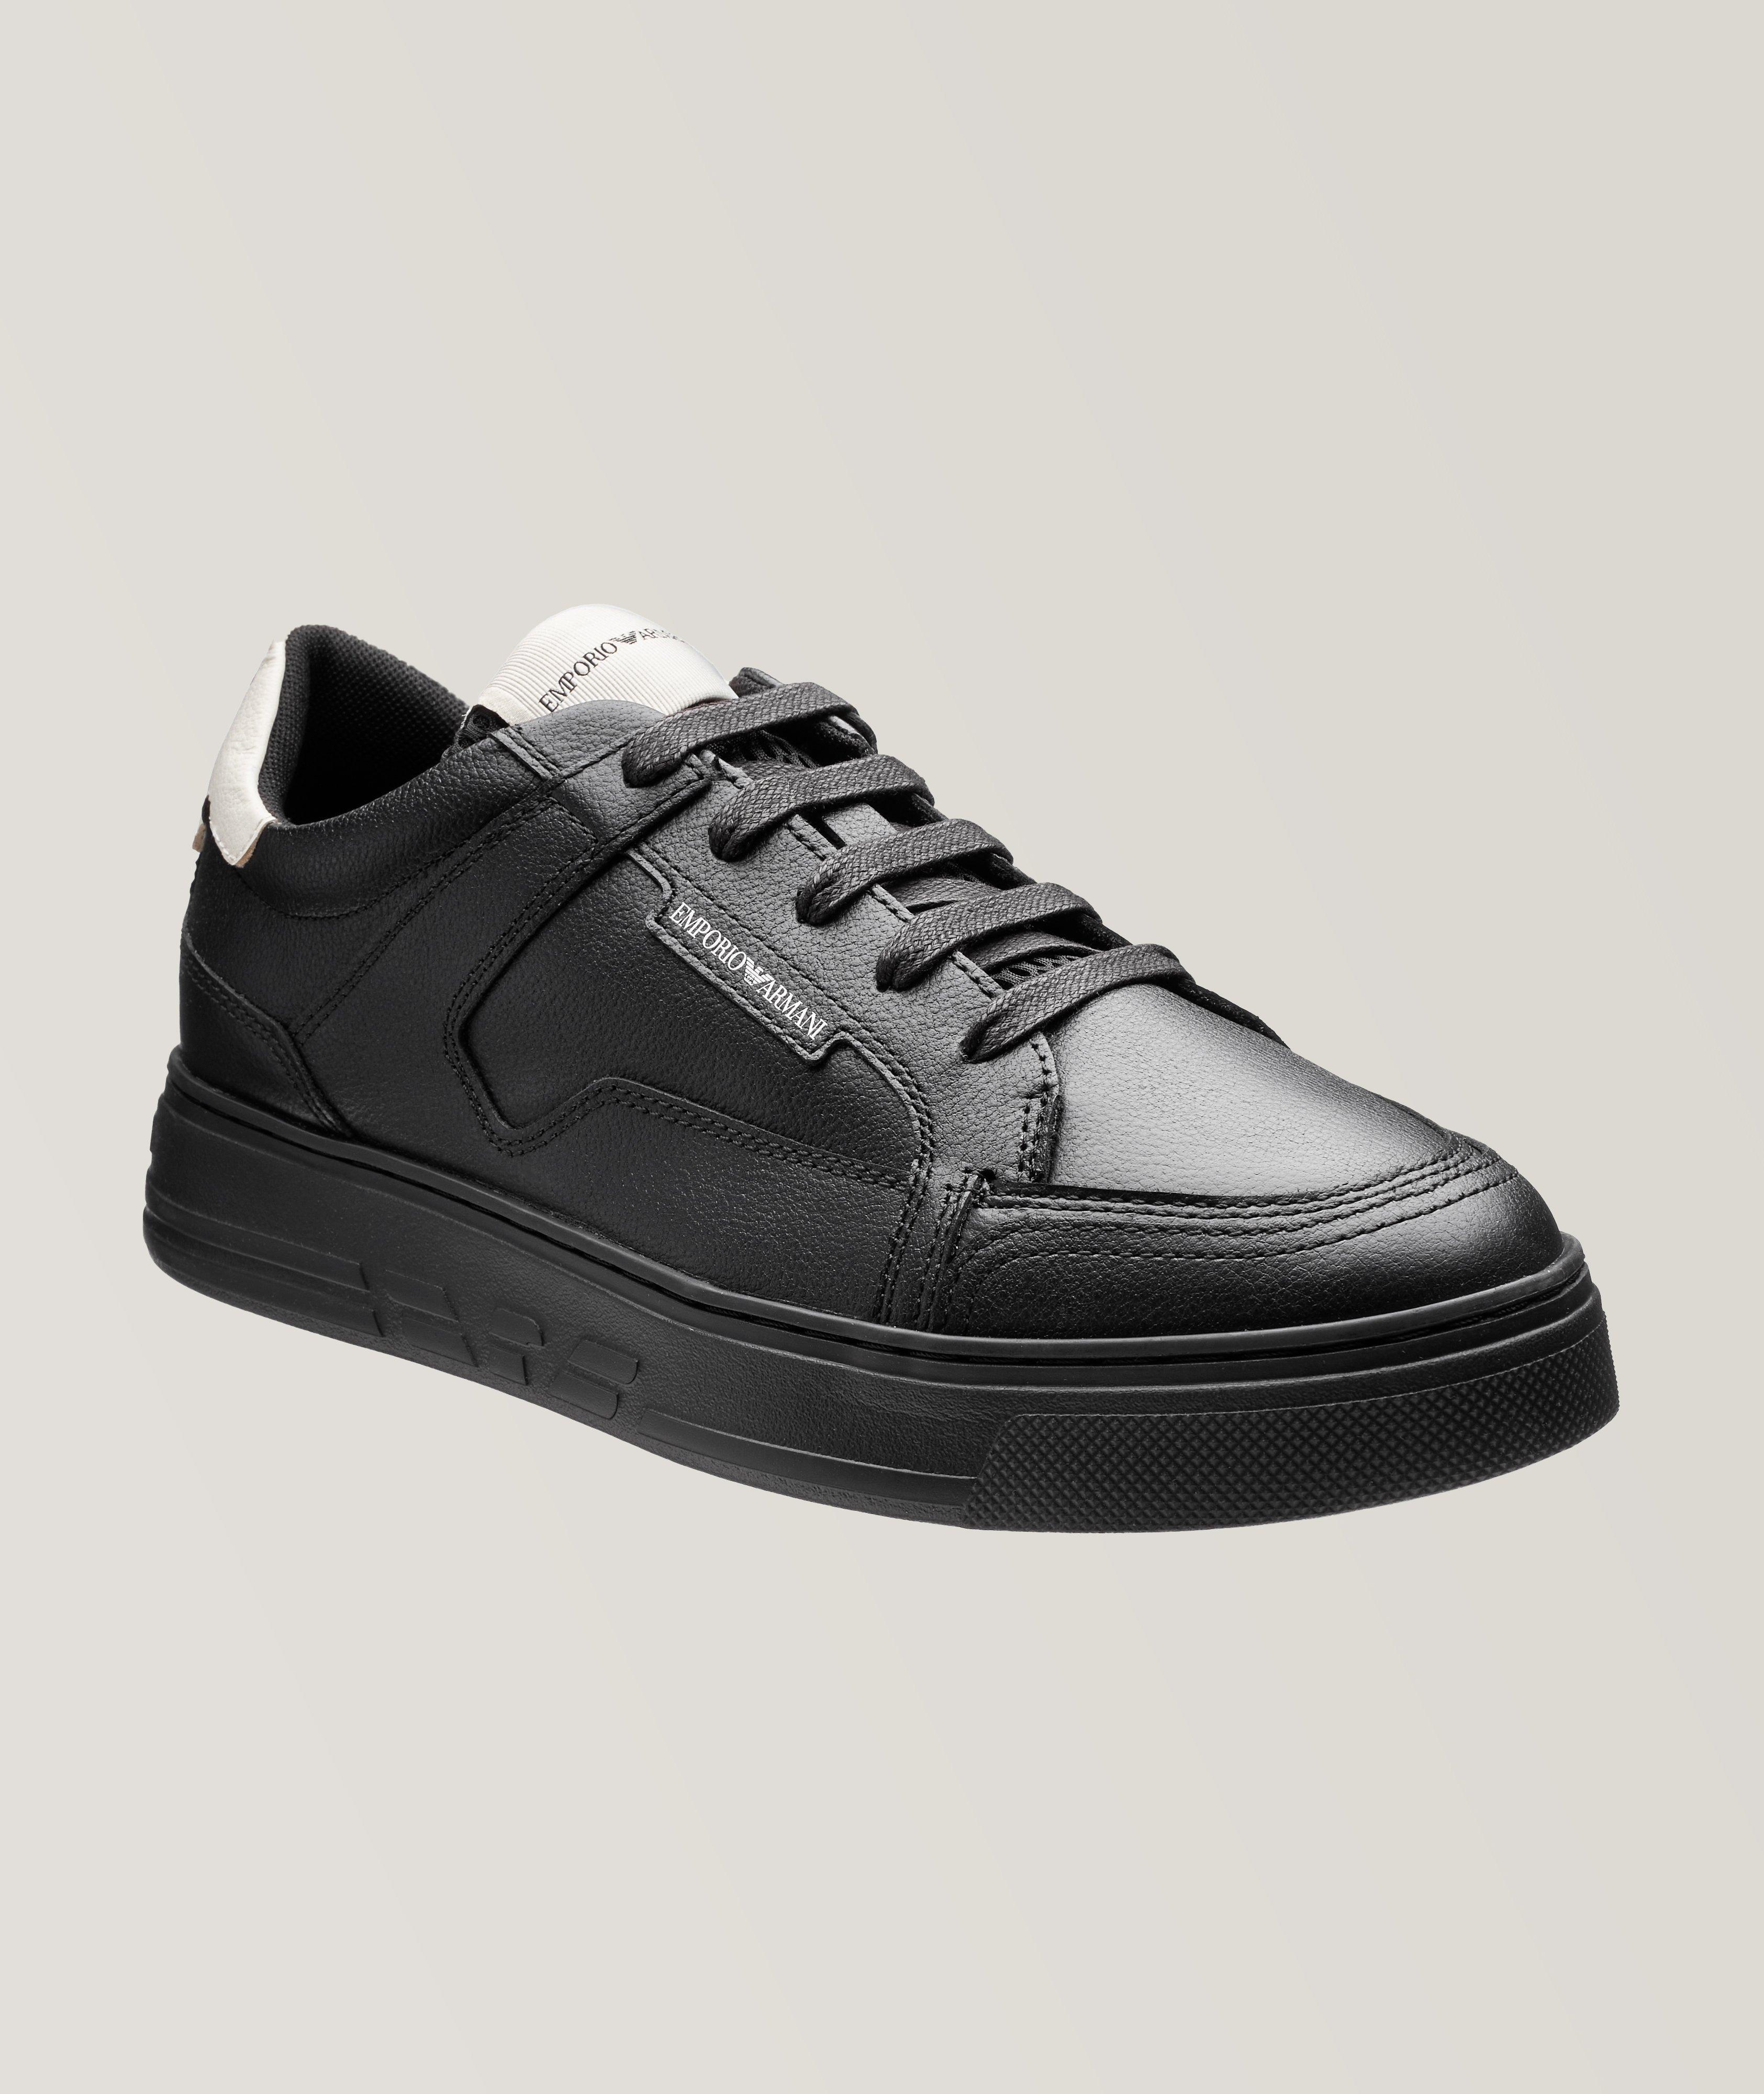 Hammered Leather Sneakers image 0